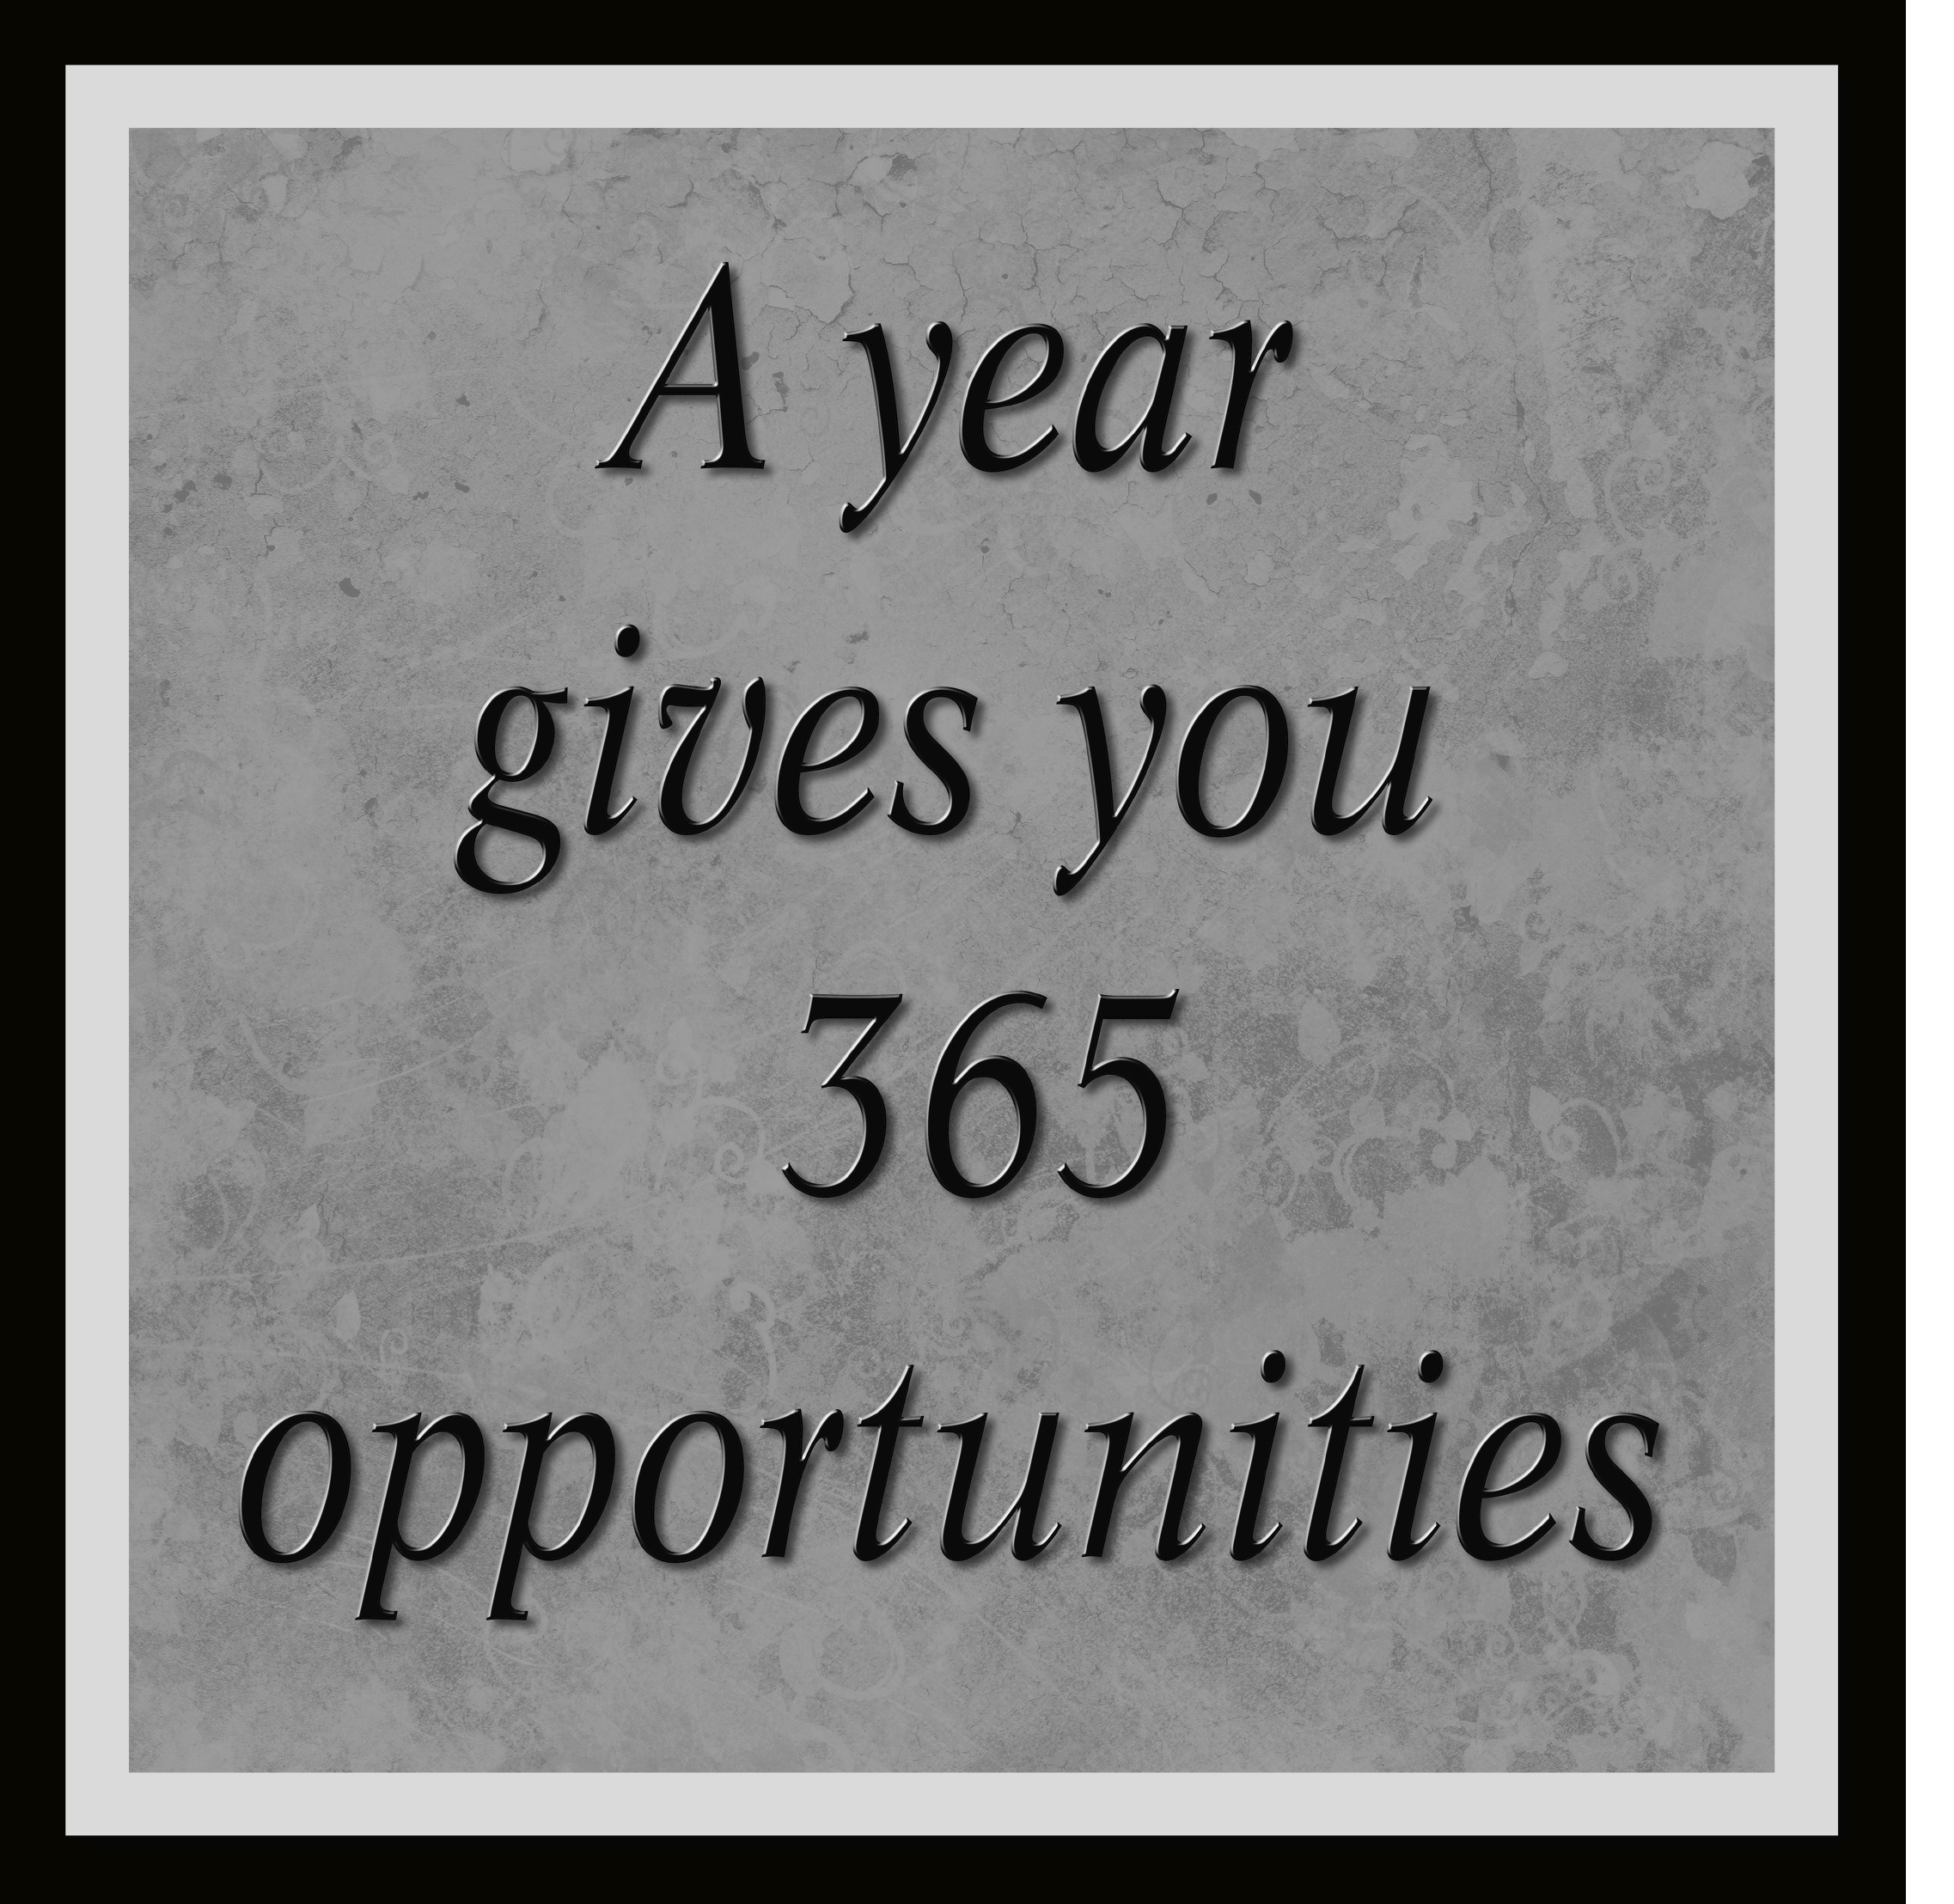 2018 – The Year of Opportunity